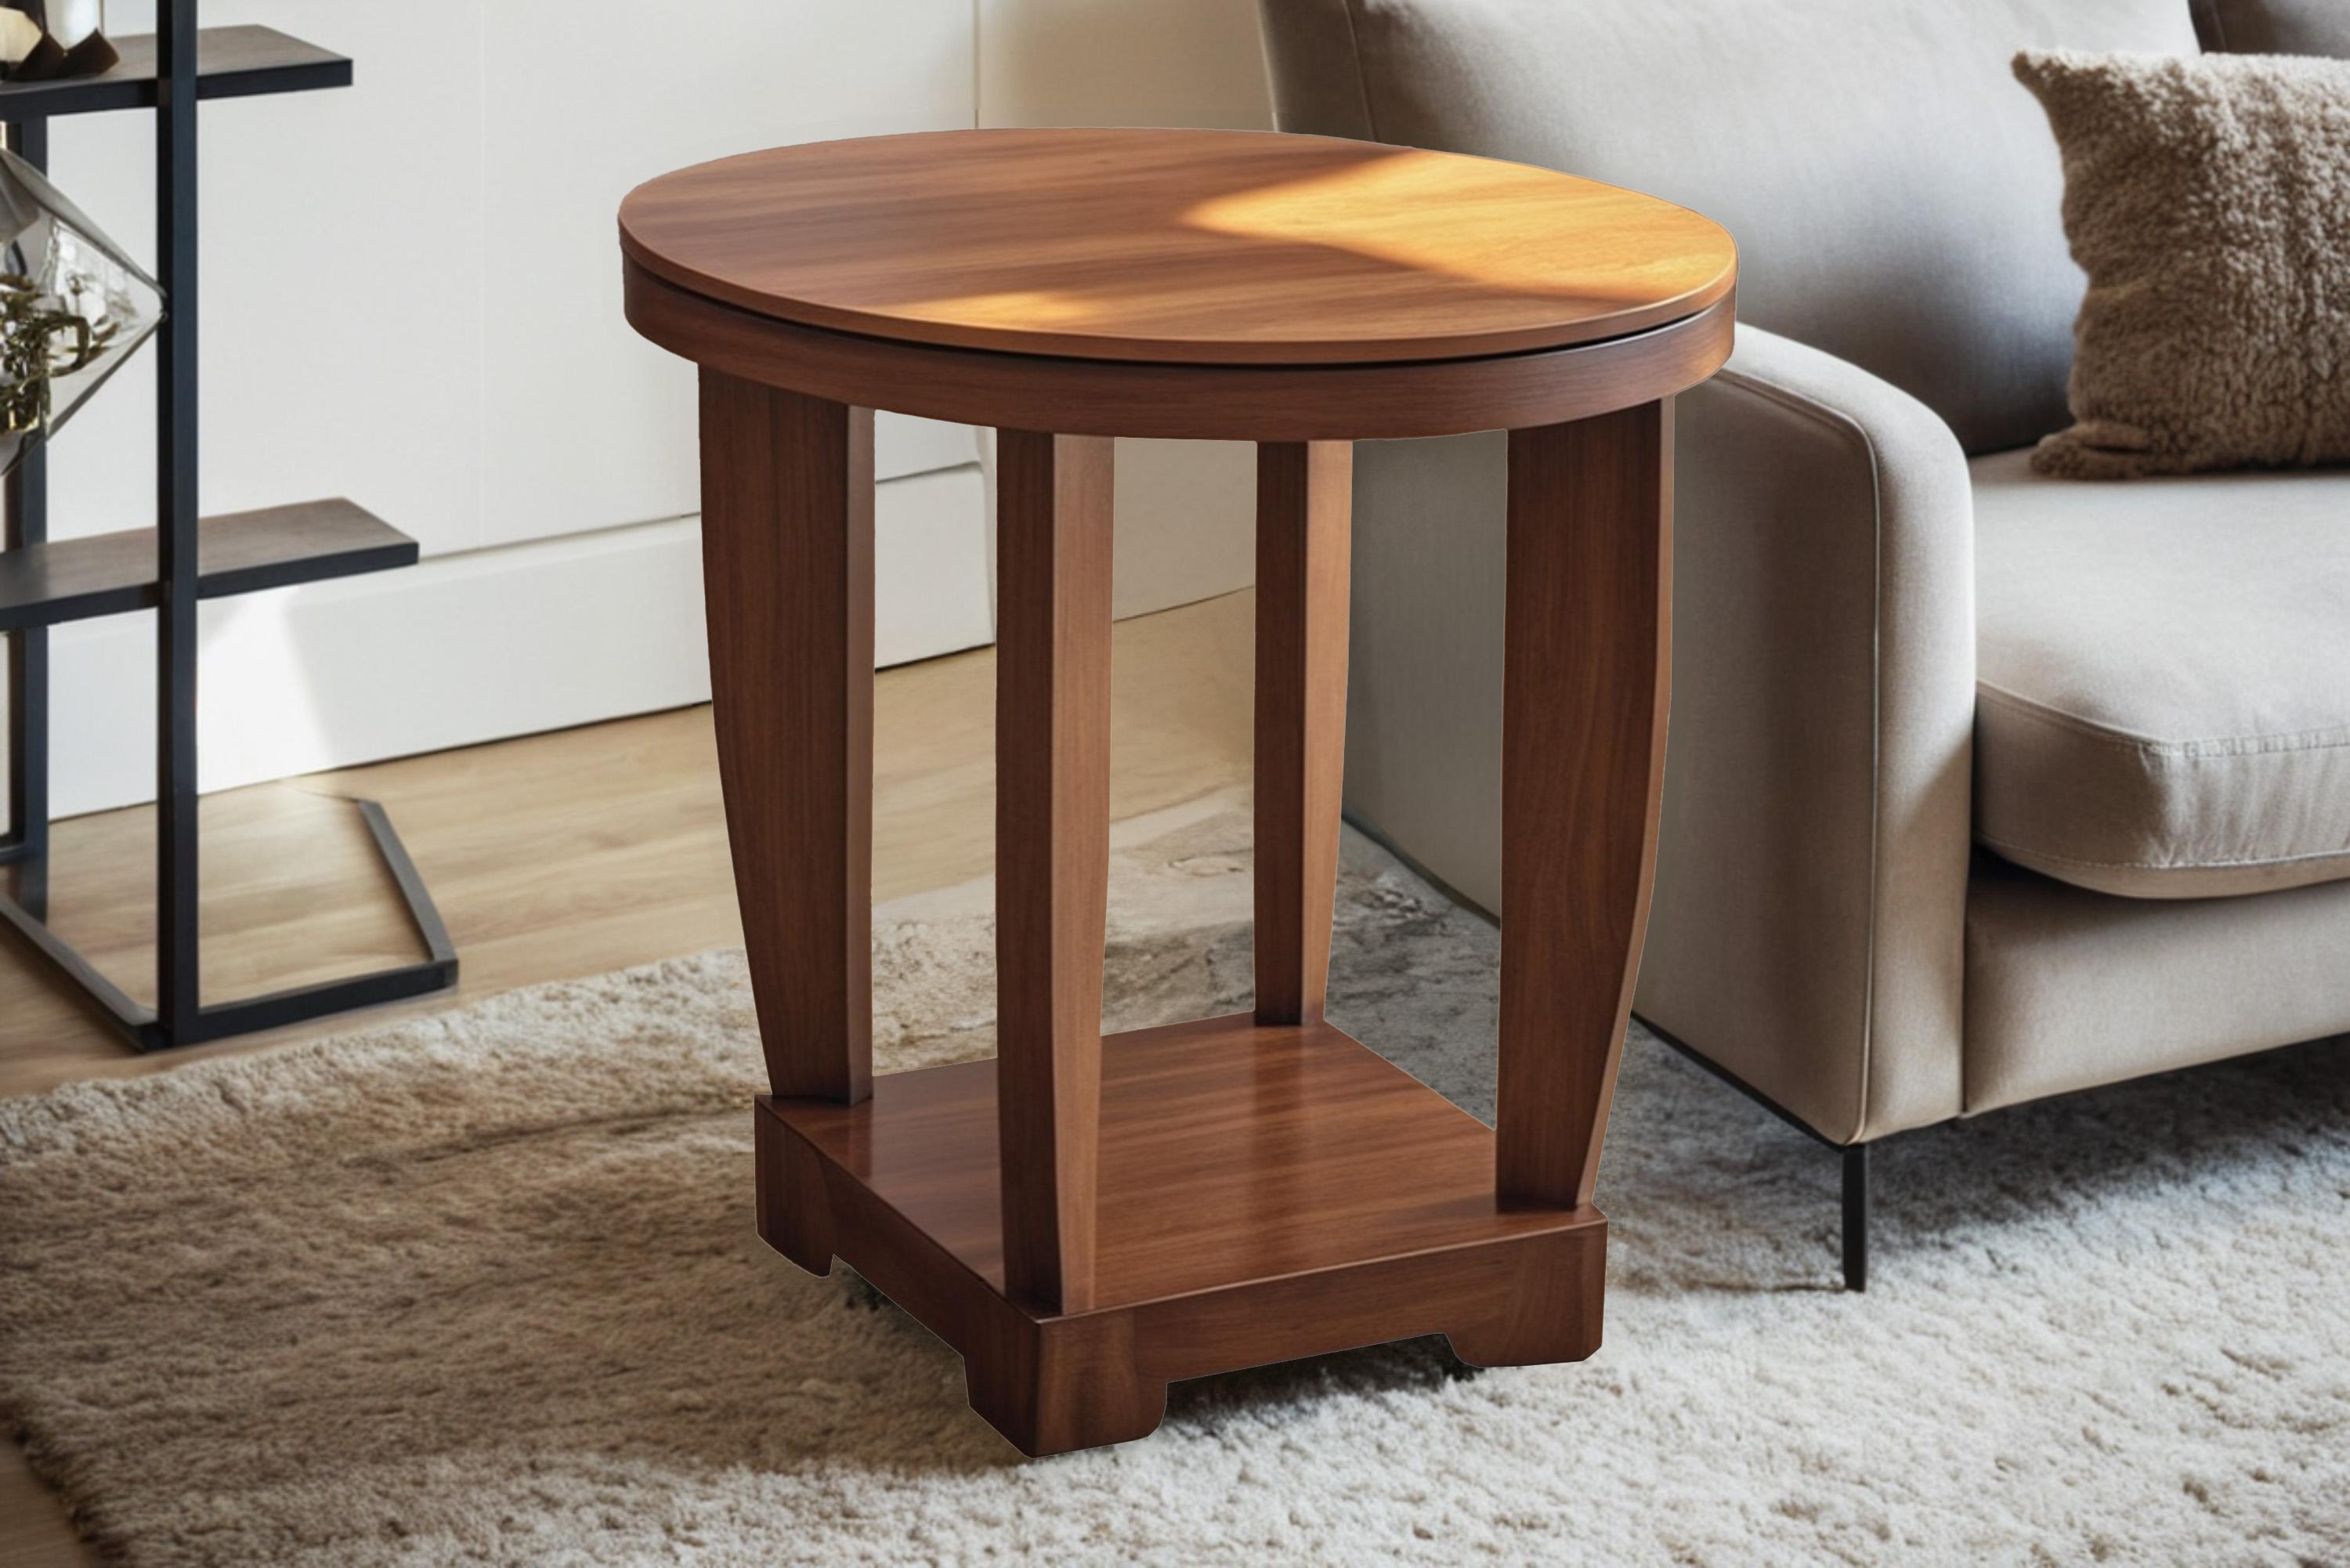 Beautiful round side table in Art Deco style with fine walnut veneer and an expressive veneer image. The curved legs and the angular lower level give the table a nice lightness. Thanks to the simple surface, the table fits perfectly into any room